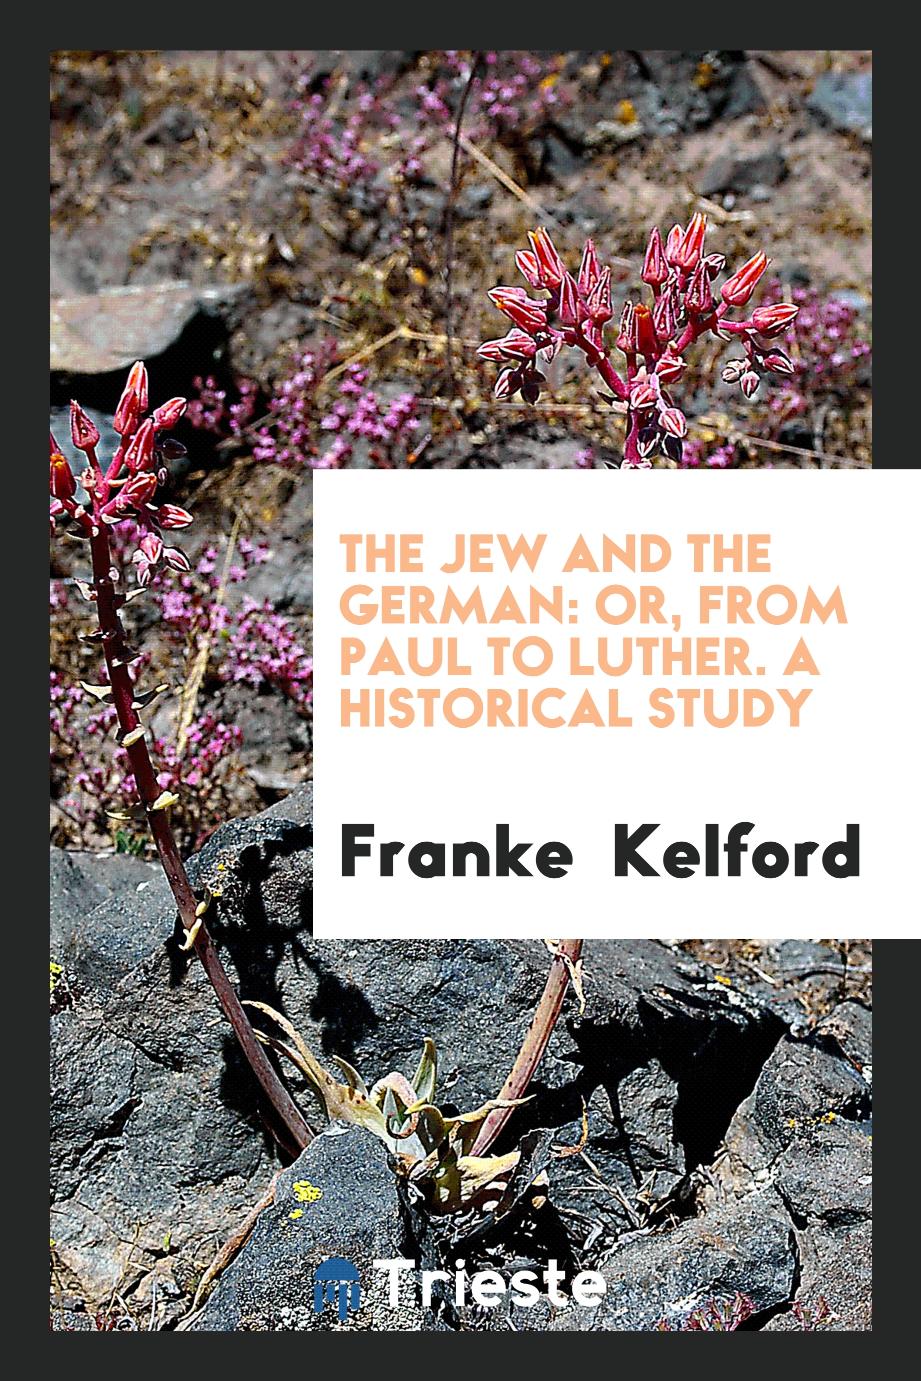 The Jew and the German: or, From Paul to Luther. A Historical Study